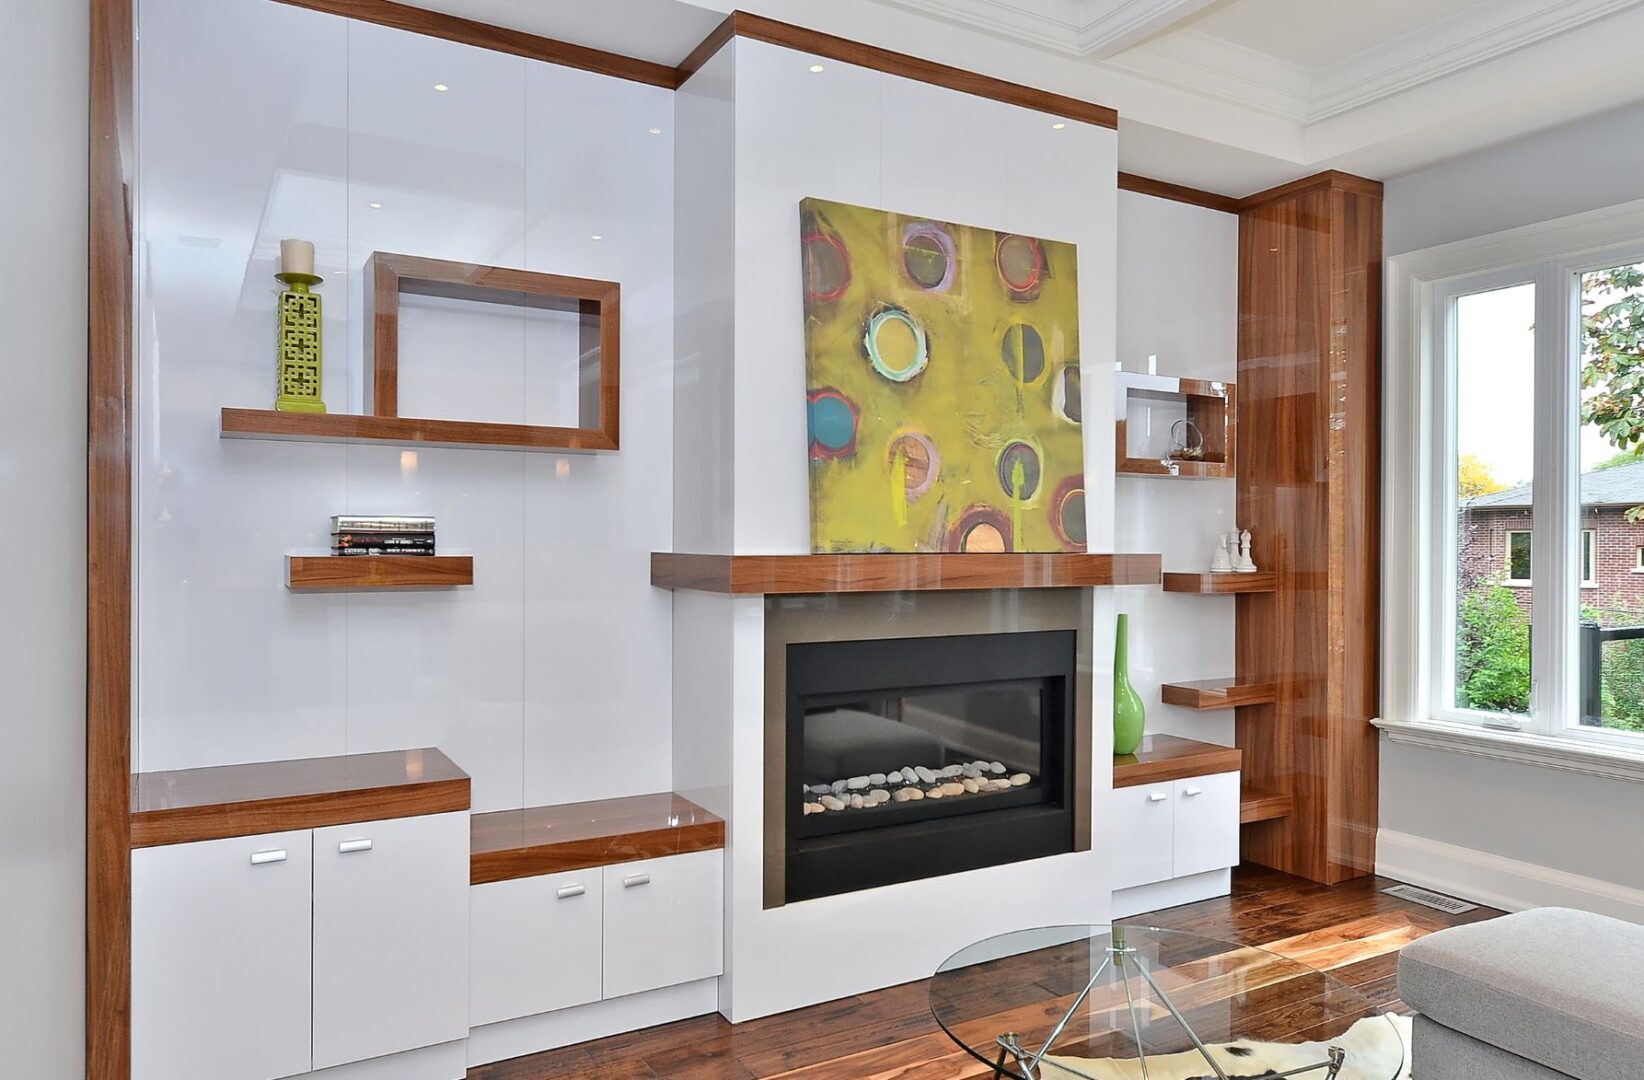 A Fire Space With White Cabinets and Wood Counters